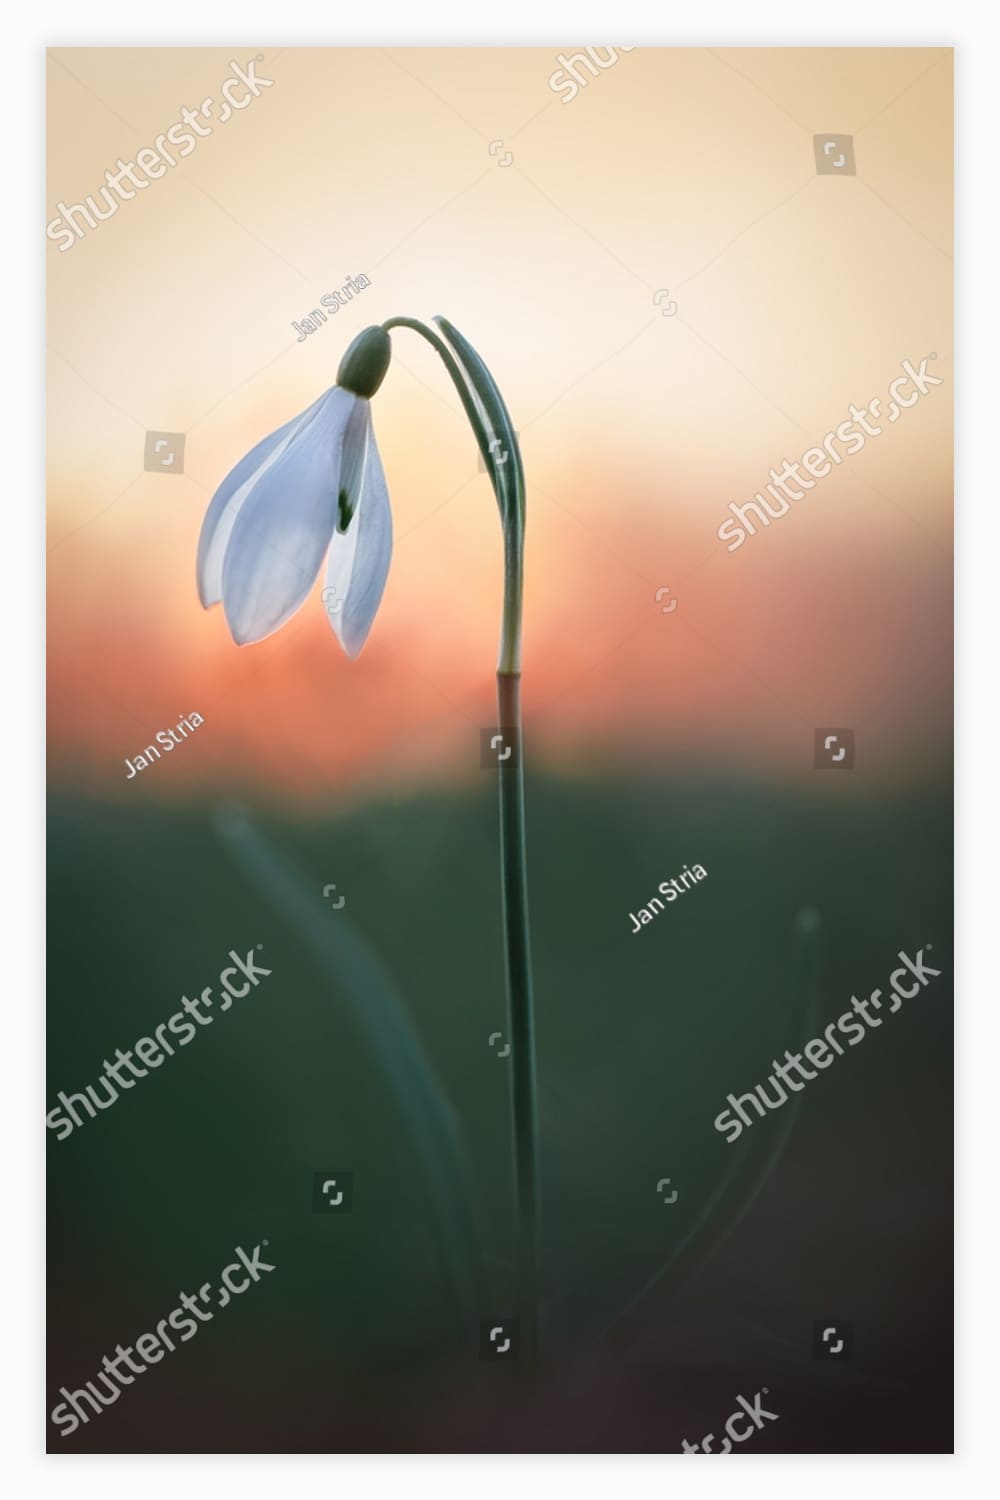 Galanthus or Snowdrop are the delicate flowers, among the first to blossom in the spring.